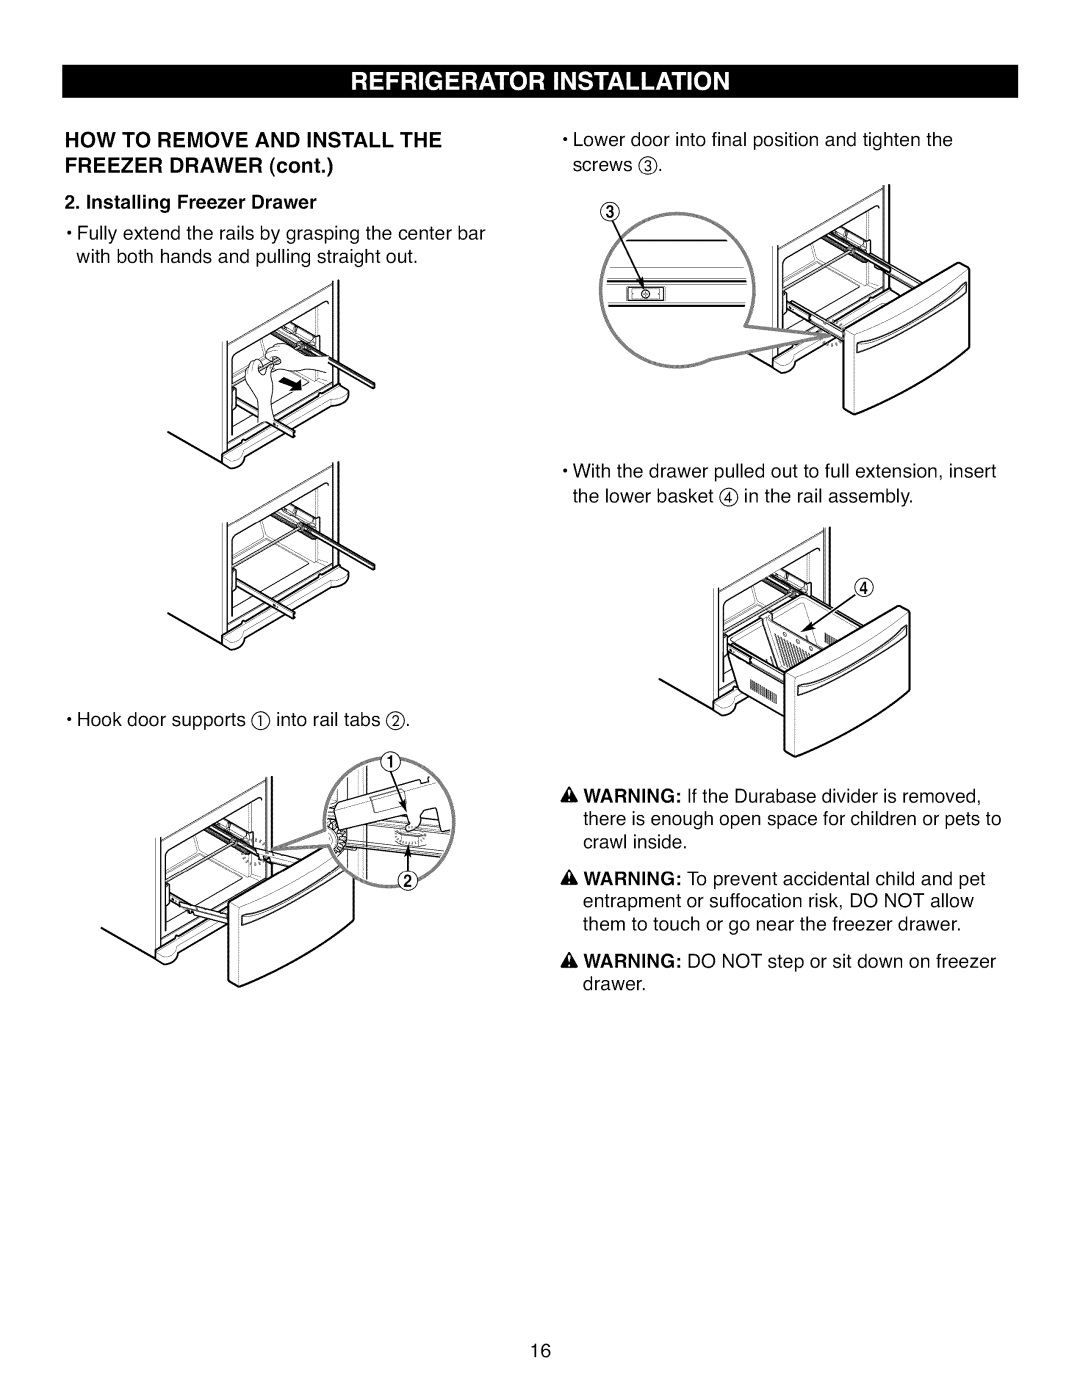 Kenmore 795.7105 manual HOW TO REMOVE AND INSTALL THE FREEZER DRAWER cont, Installing Freezer Drawer 